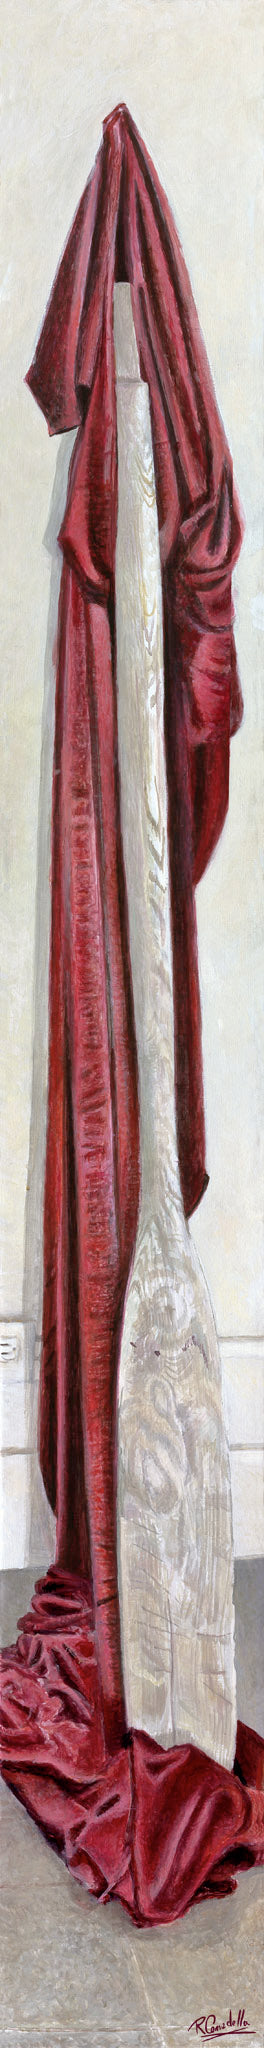 Oar with Red Cloth